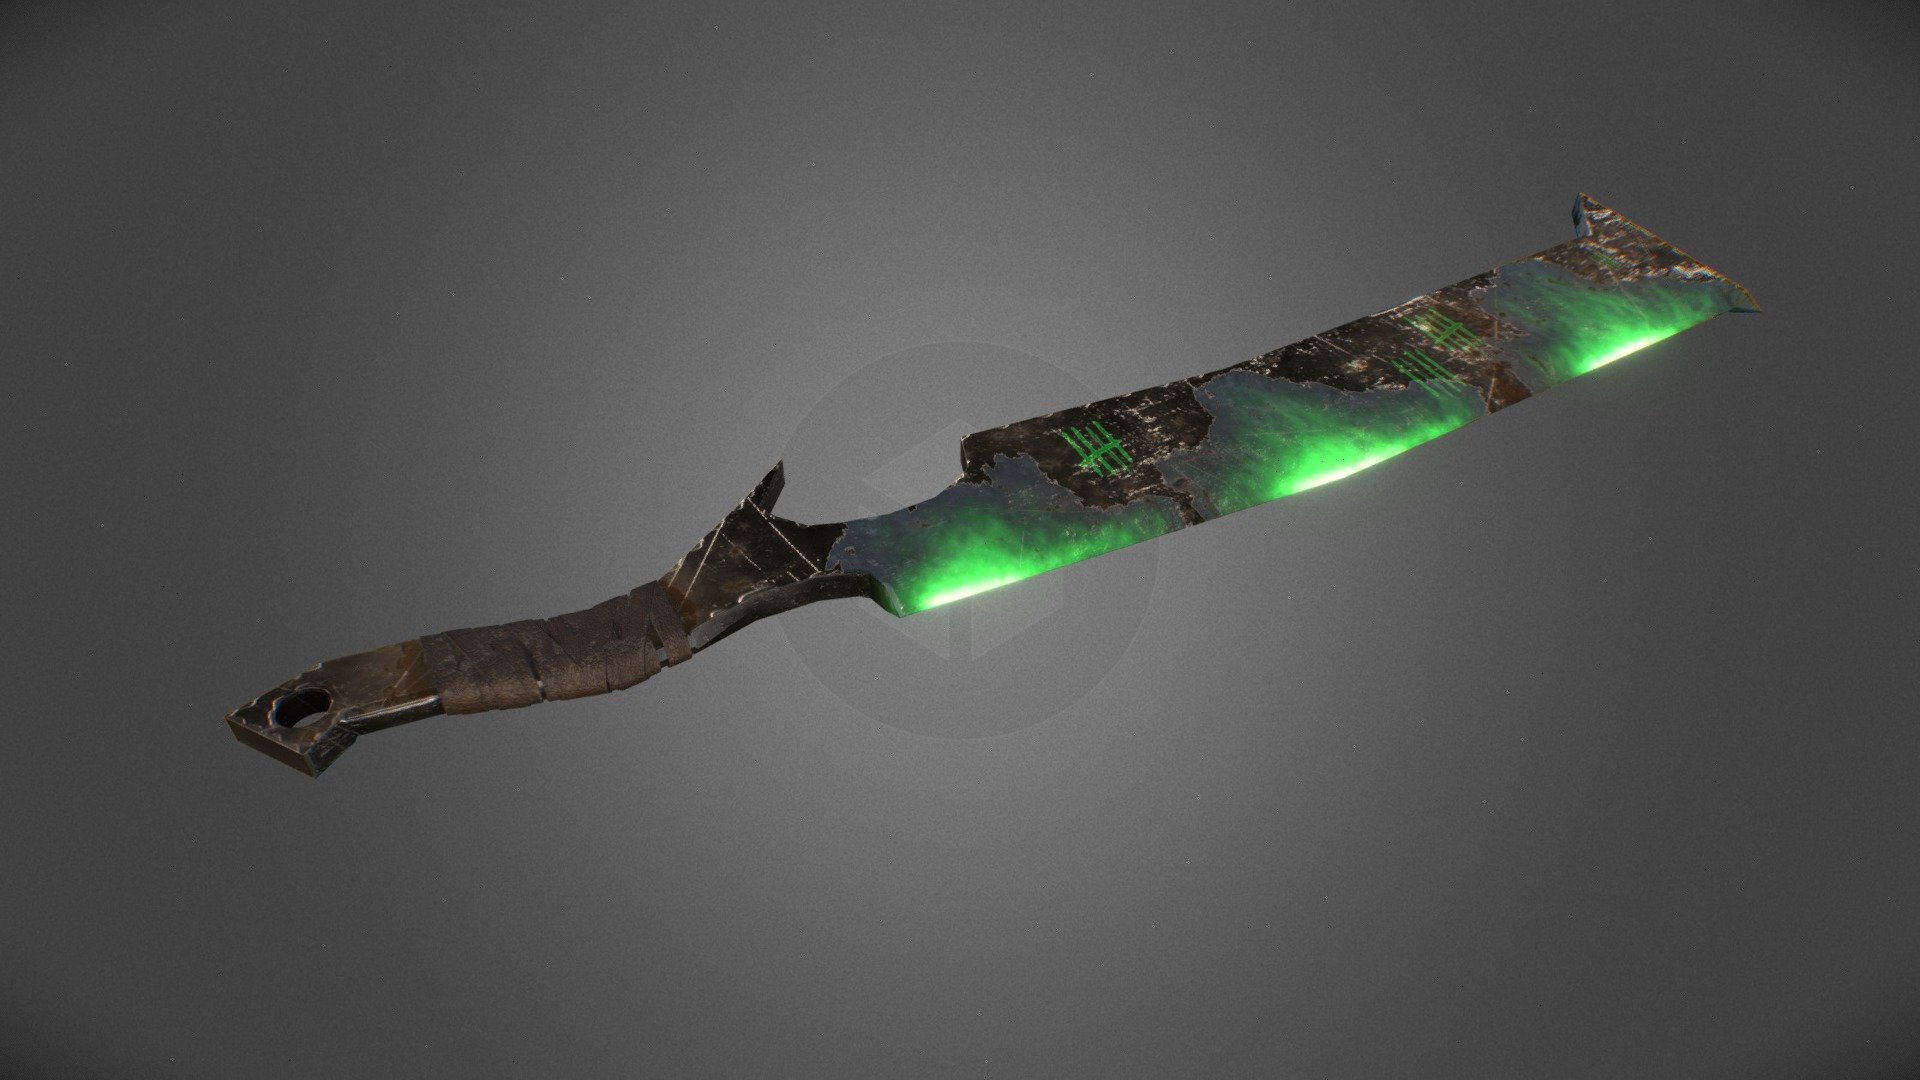 Toxic Machete

Model made on Blender and texture created on Adobe Substance 3D Painter - Toxic Machete - 3D model by Federico Ferretti (@federicoferretti01) 3d model